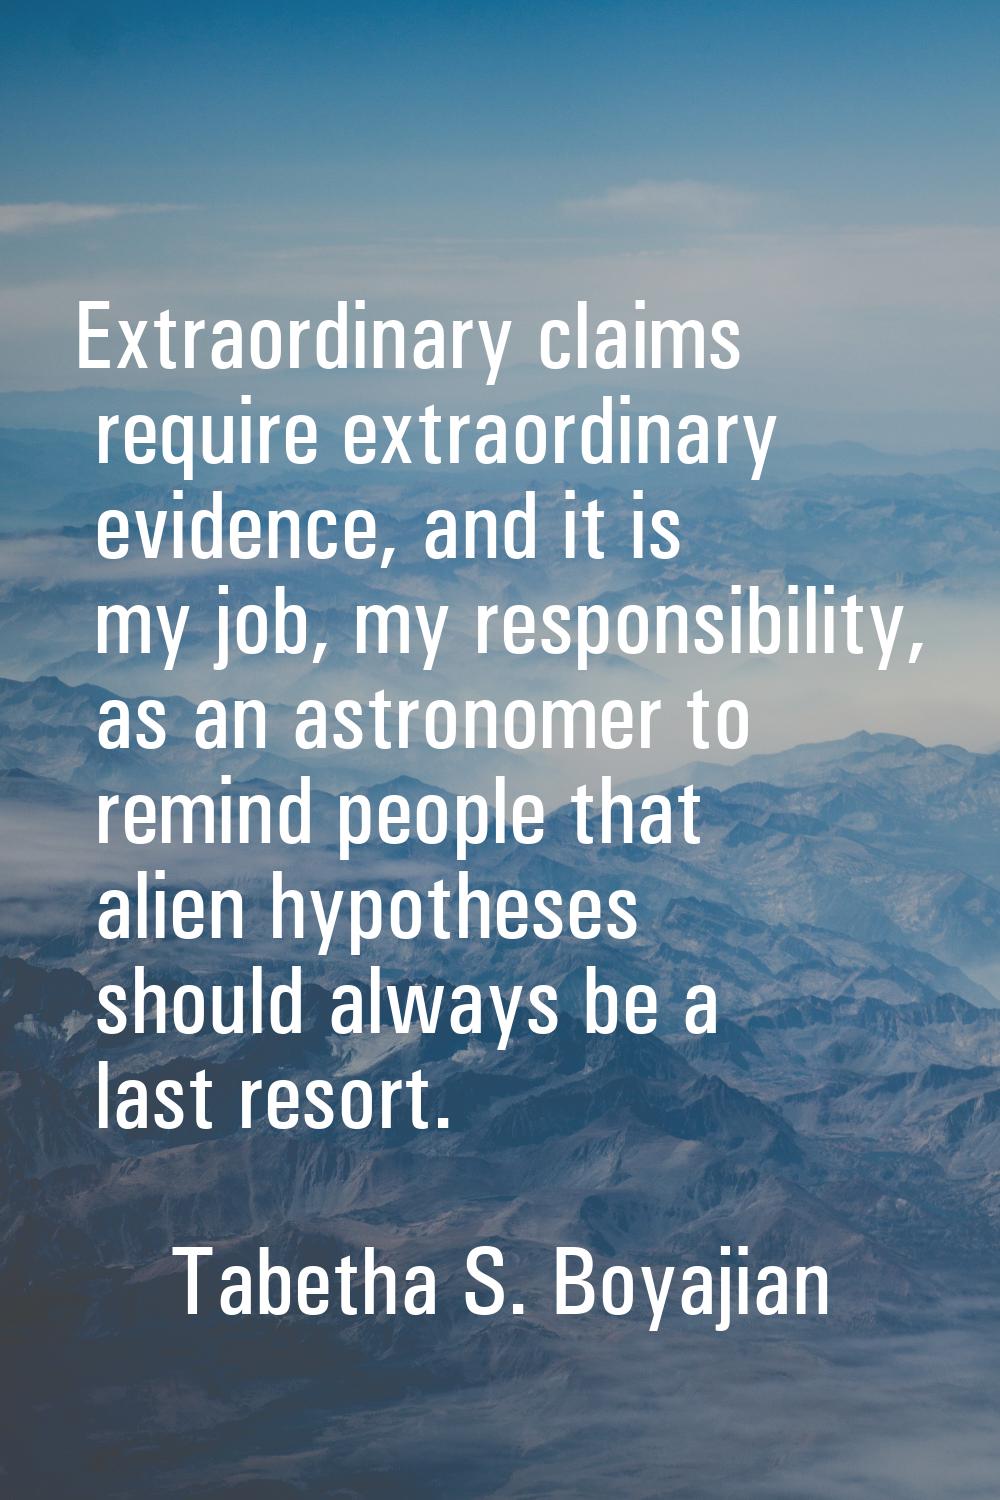 Extraordinary claims require extraordinary evidence, and it is my job, my responsibility, as an ast